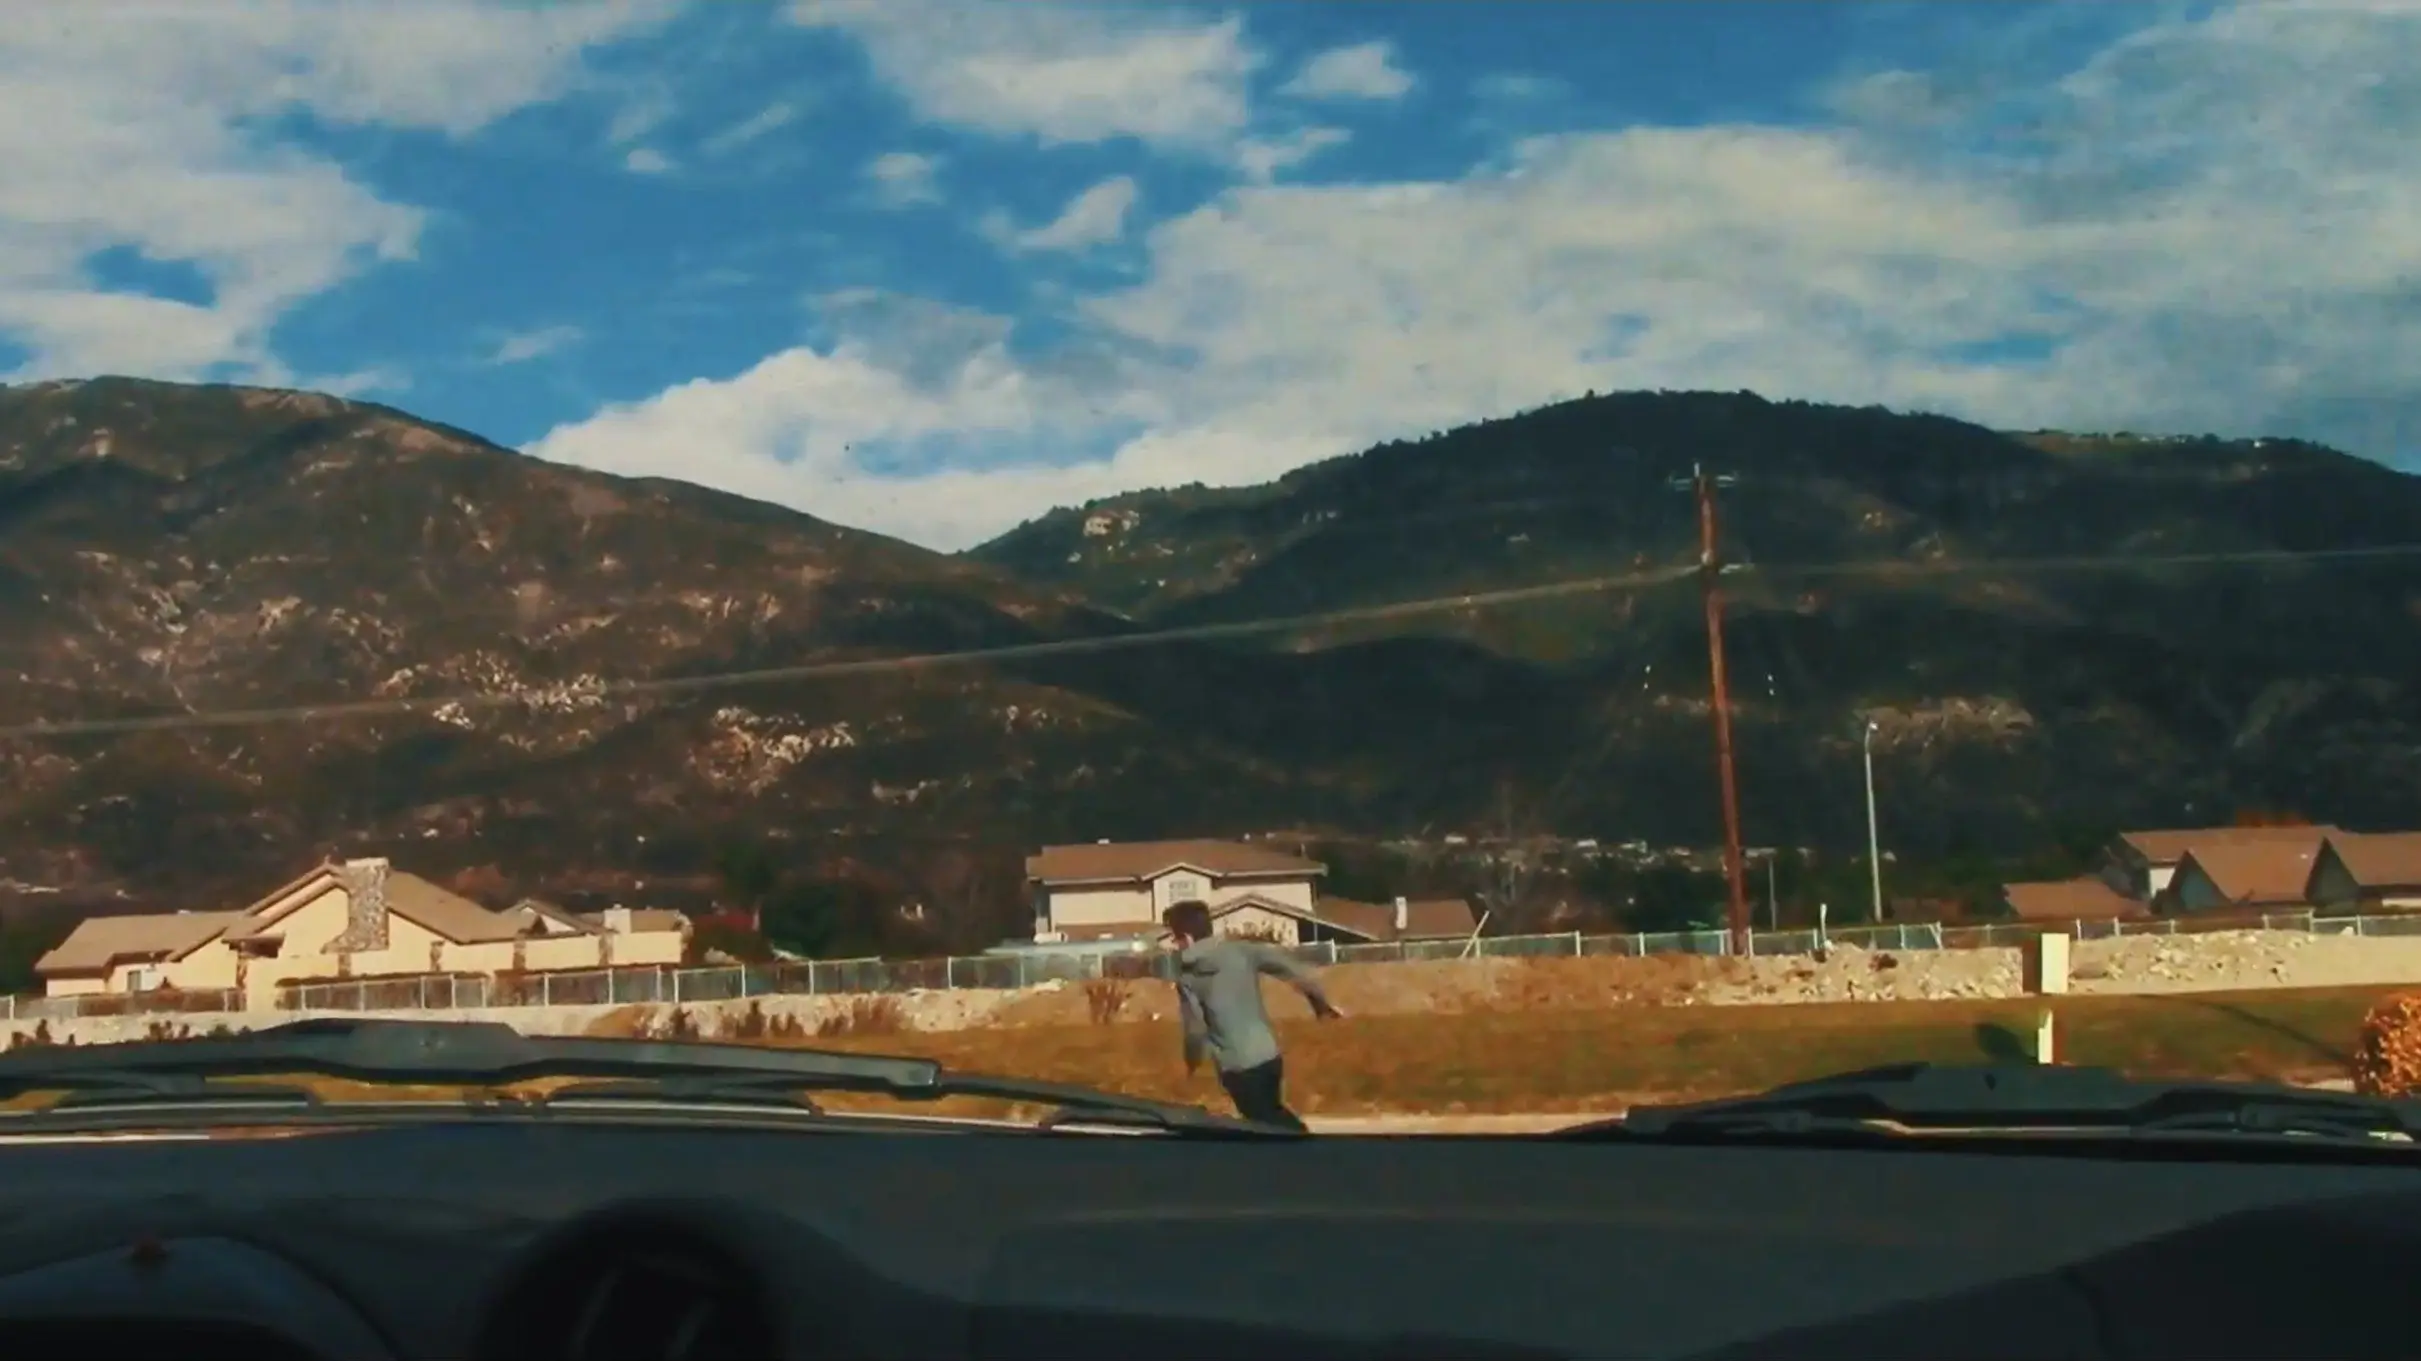 A man runs away from a car that we are in with a house and mountains in the background.